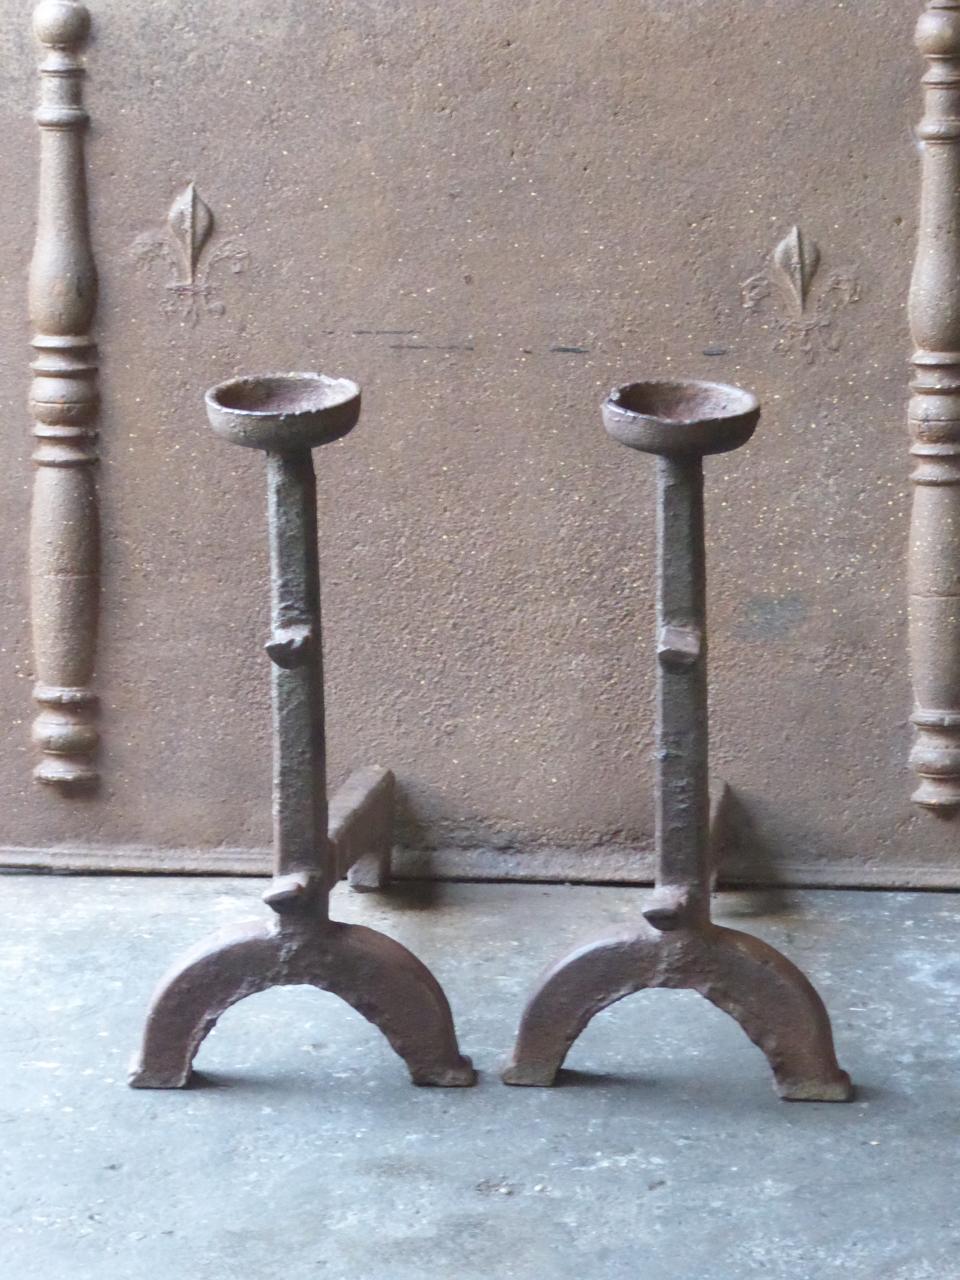 17th century French Gothic andirons made of cast iron. The andirons have spit hooks to grill food. In France this type of very old andirons is called 'landiers'.

The condition is good.